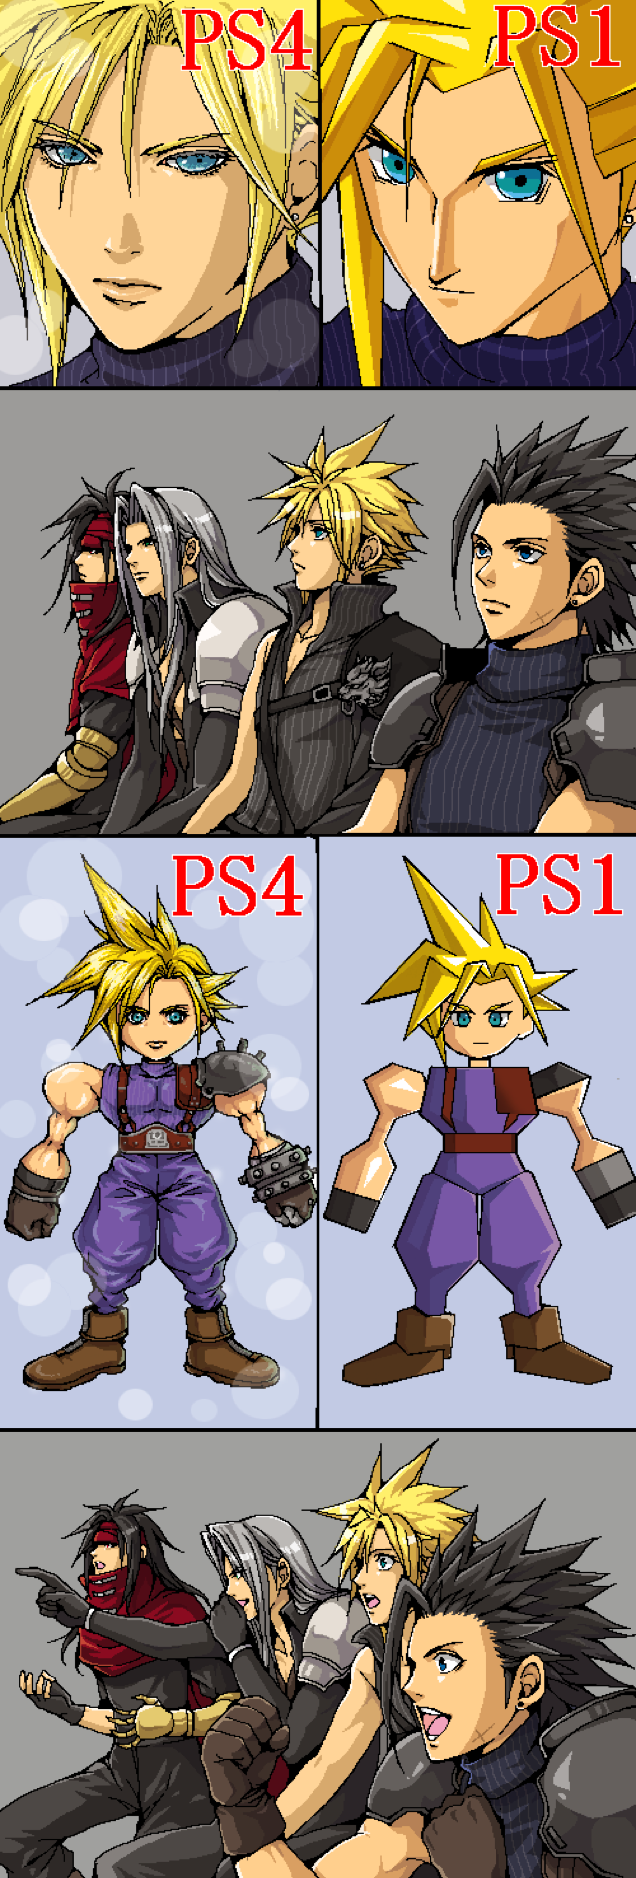 The Internet Reacts To The Final Fantasy VII Remake